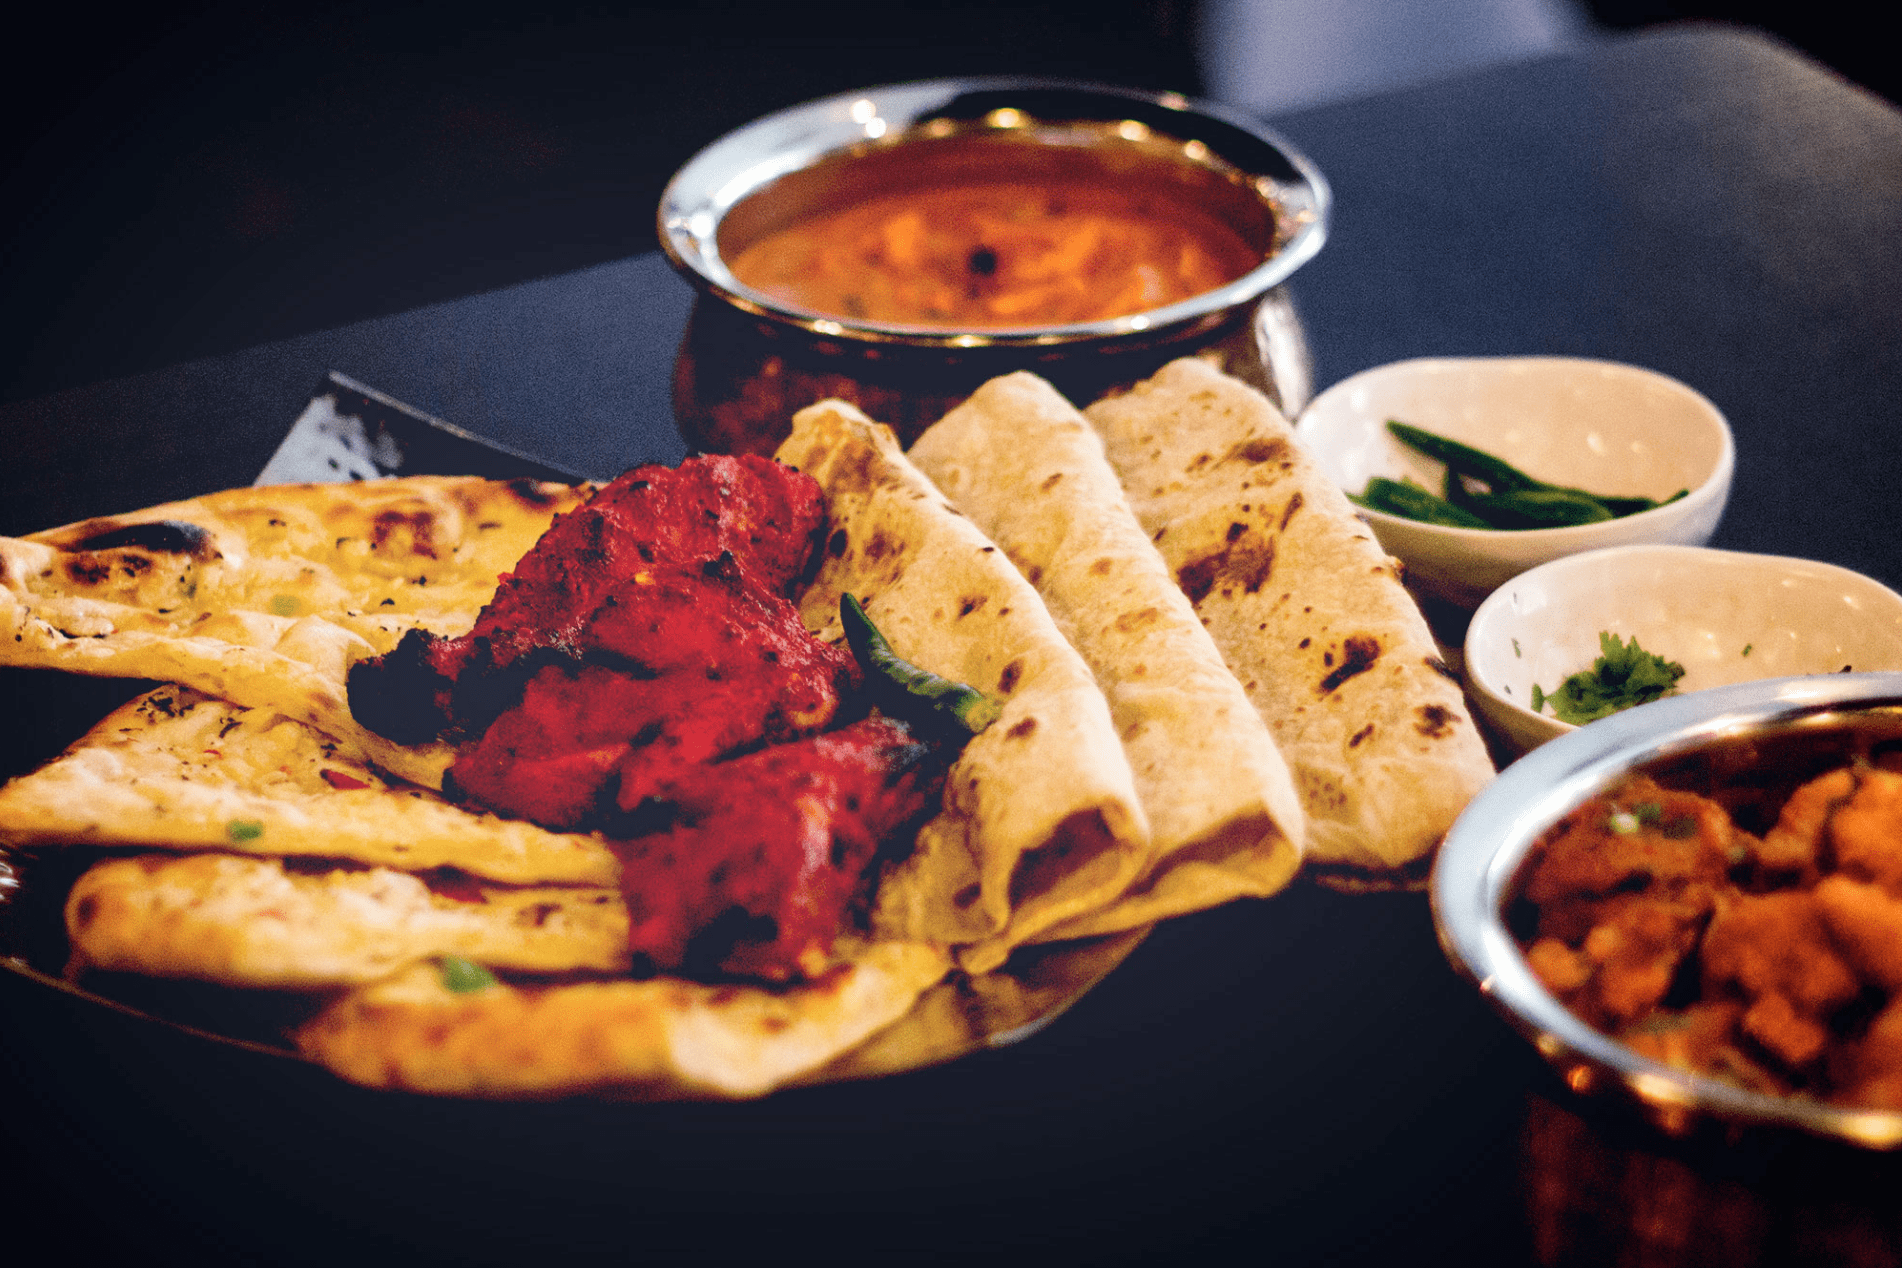 Group friendly Klang Valley restaurants - Tasty Chapathi 